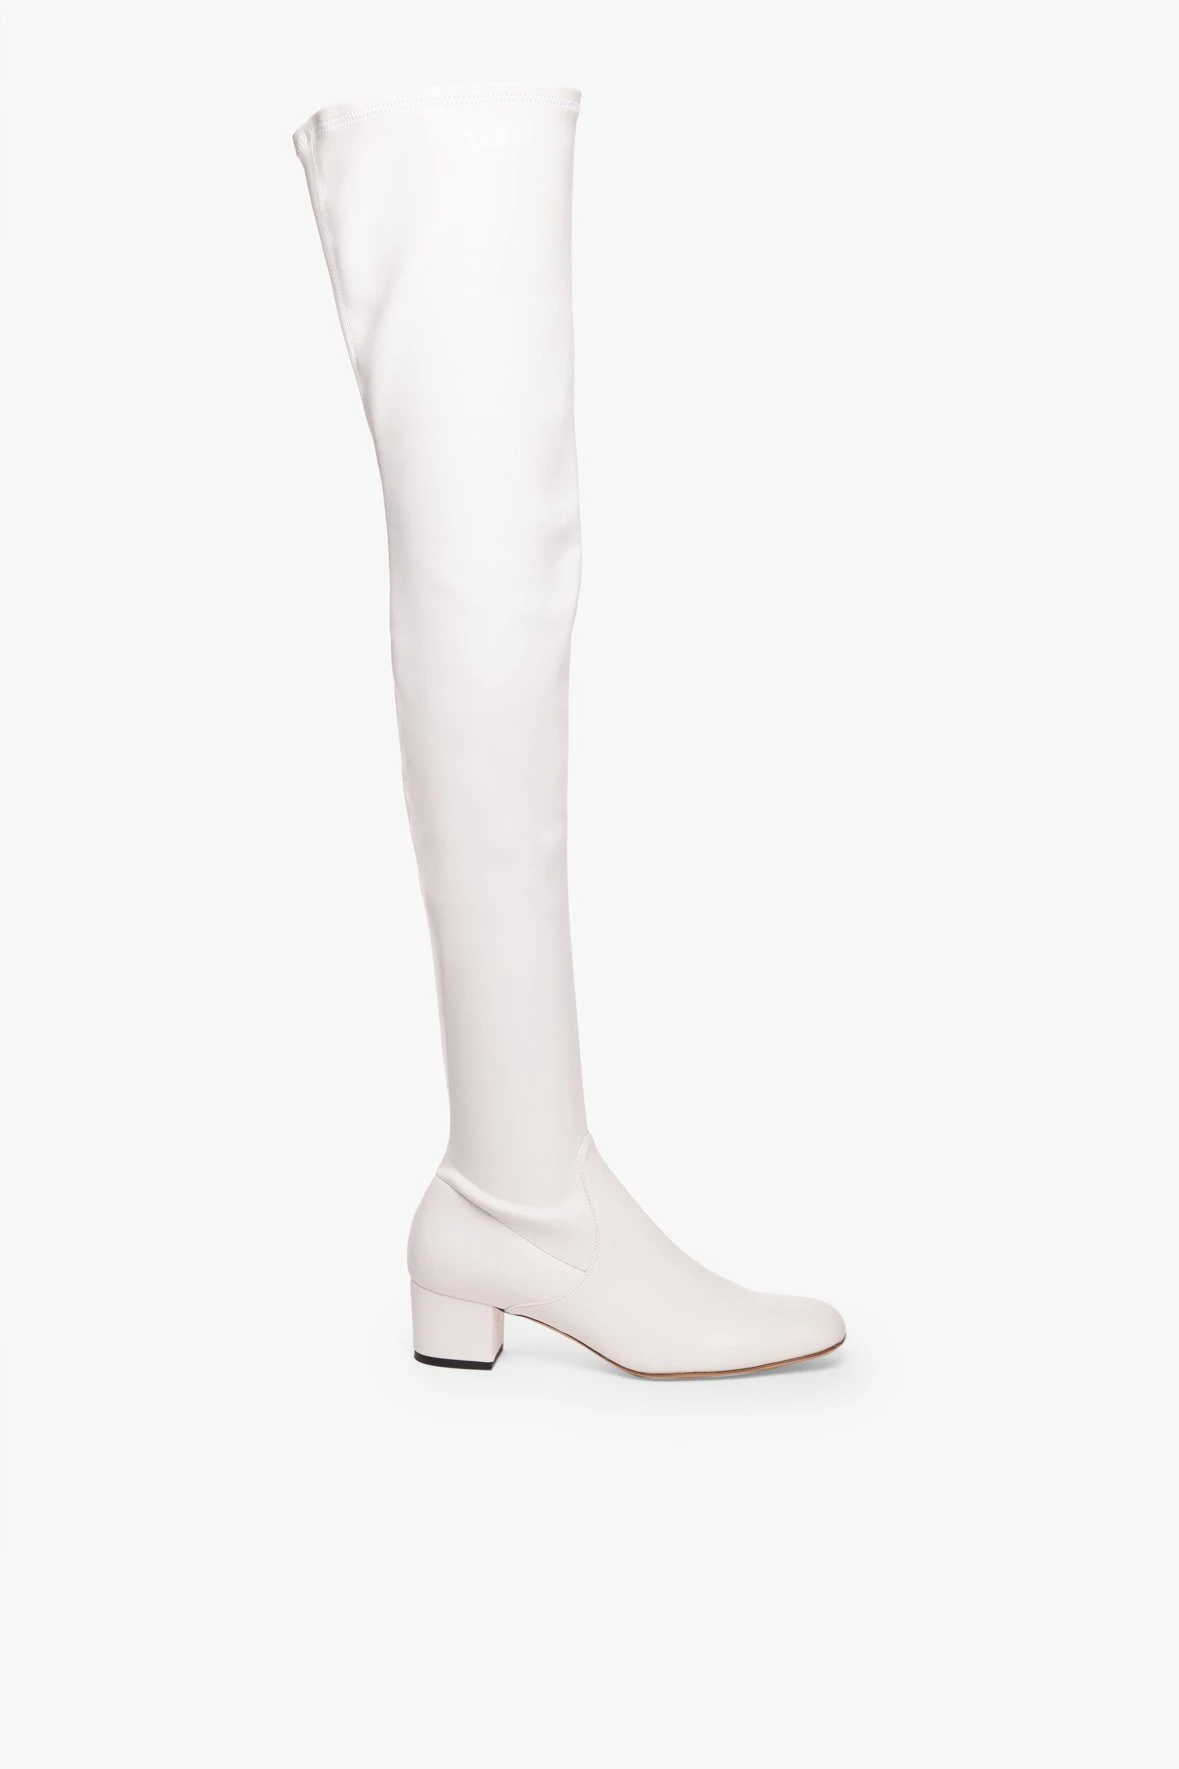 White Boots - Faux Leather Boots - Knee High Boots - Lulus